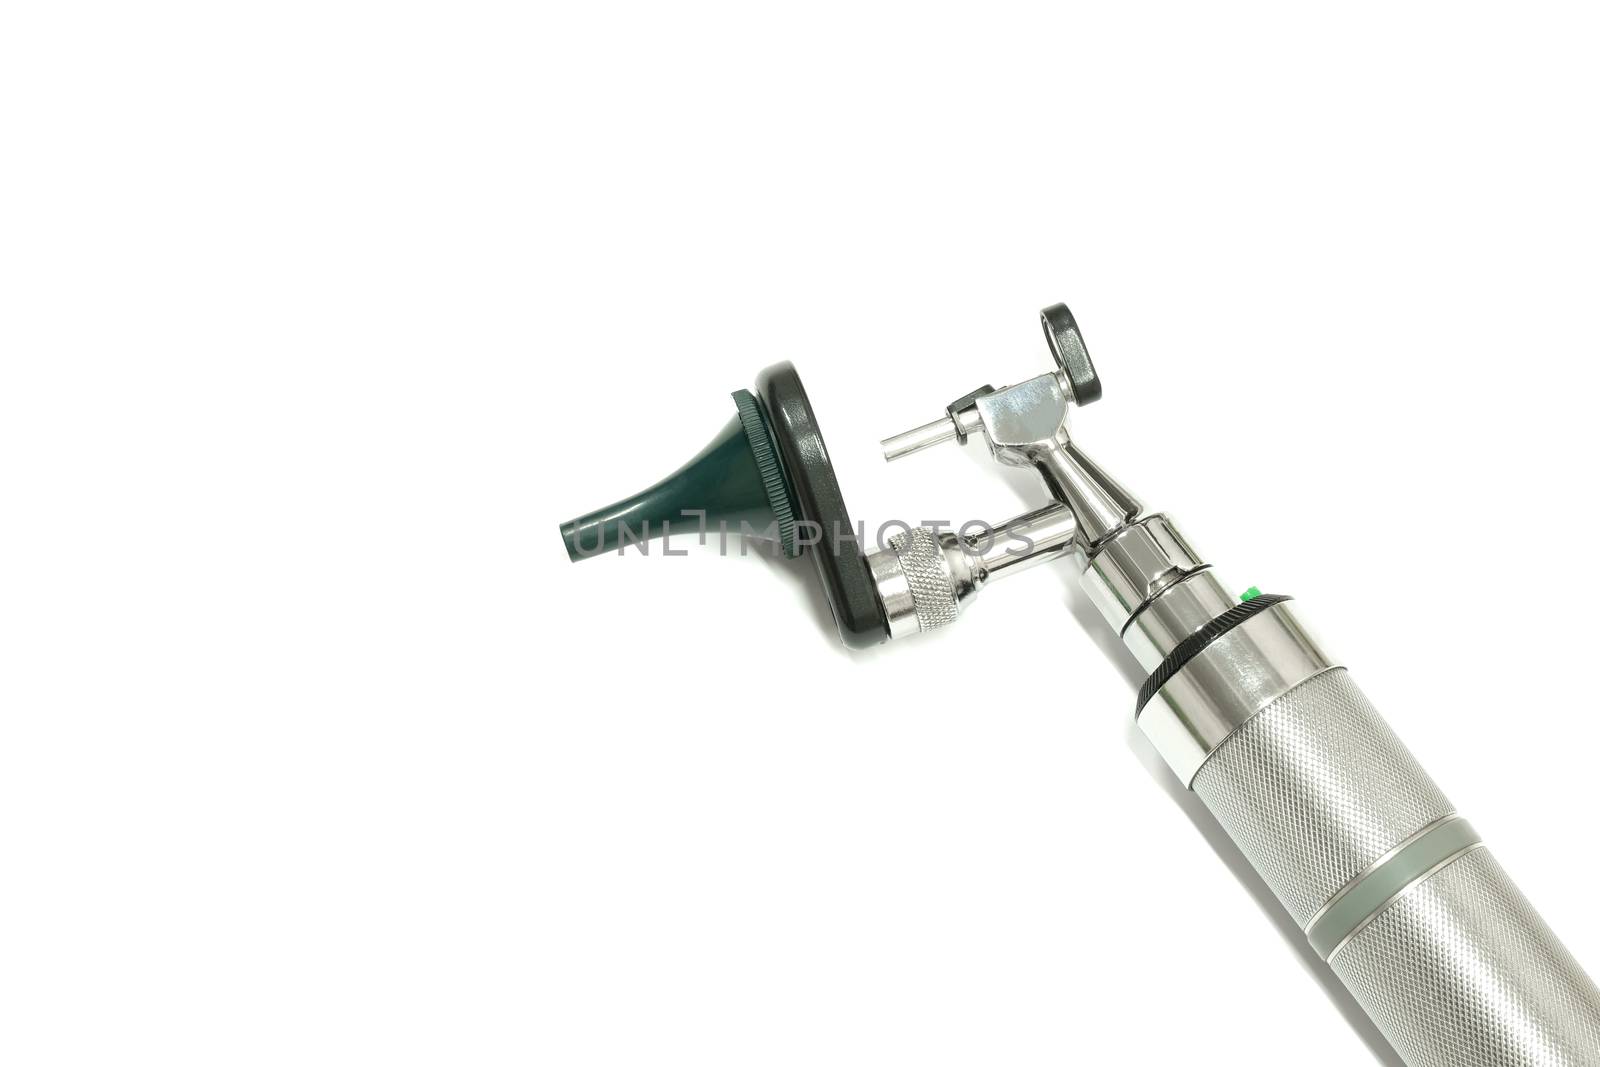 a stainless steel otoscope, an important tool used by a otolaryngologist, or an ear doctor, to examime a patient's ear, isolated on white backgrown, closeup view